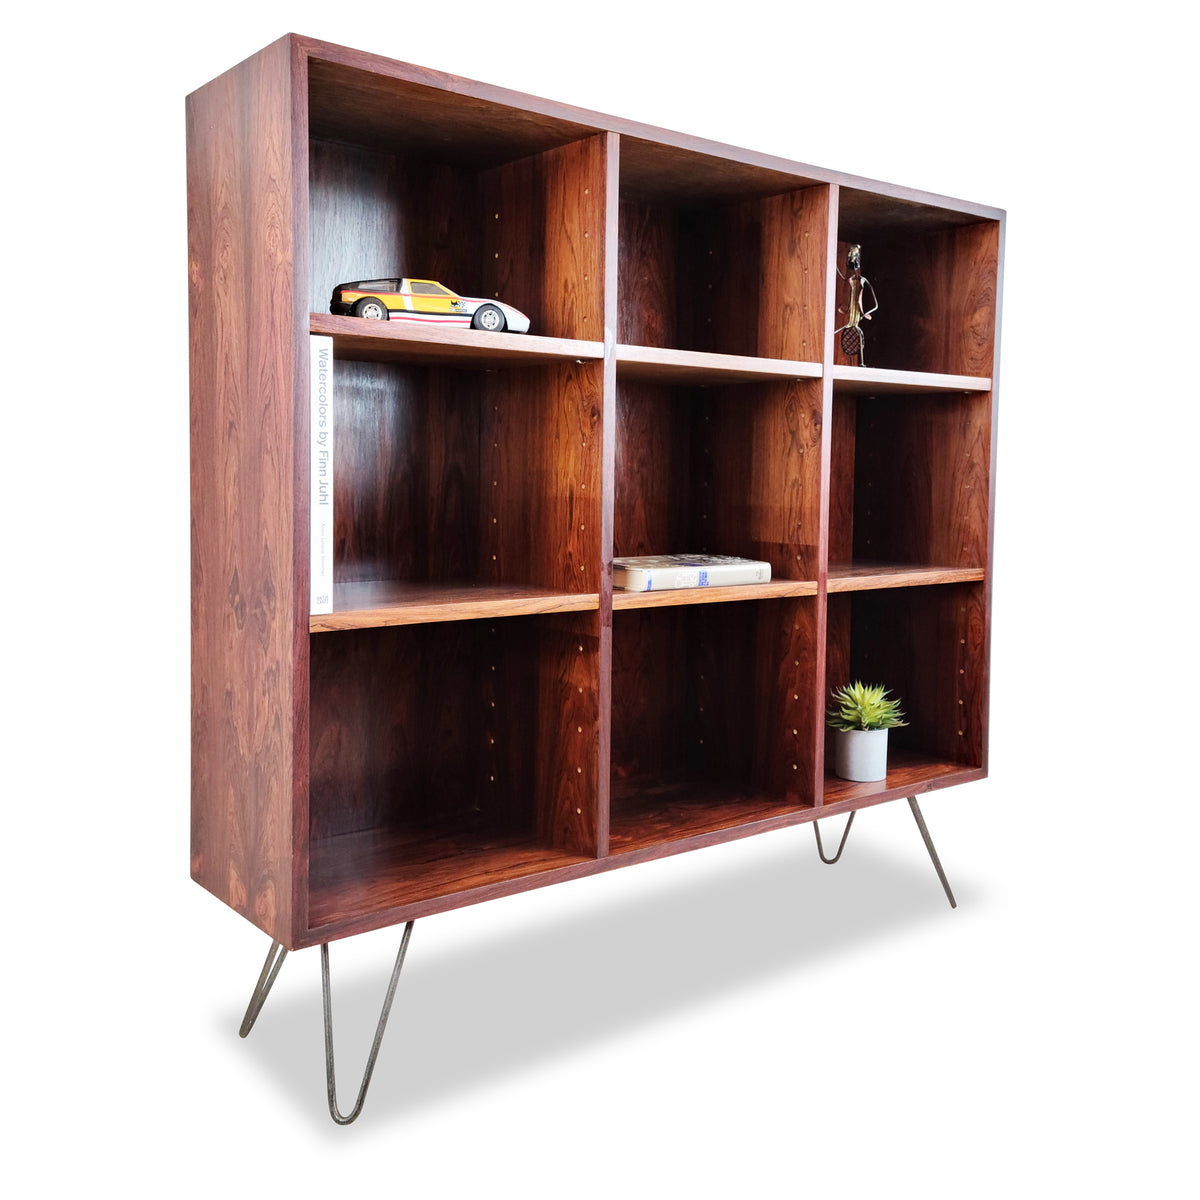 Rosewood Bookcase with Modular Shelving